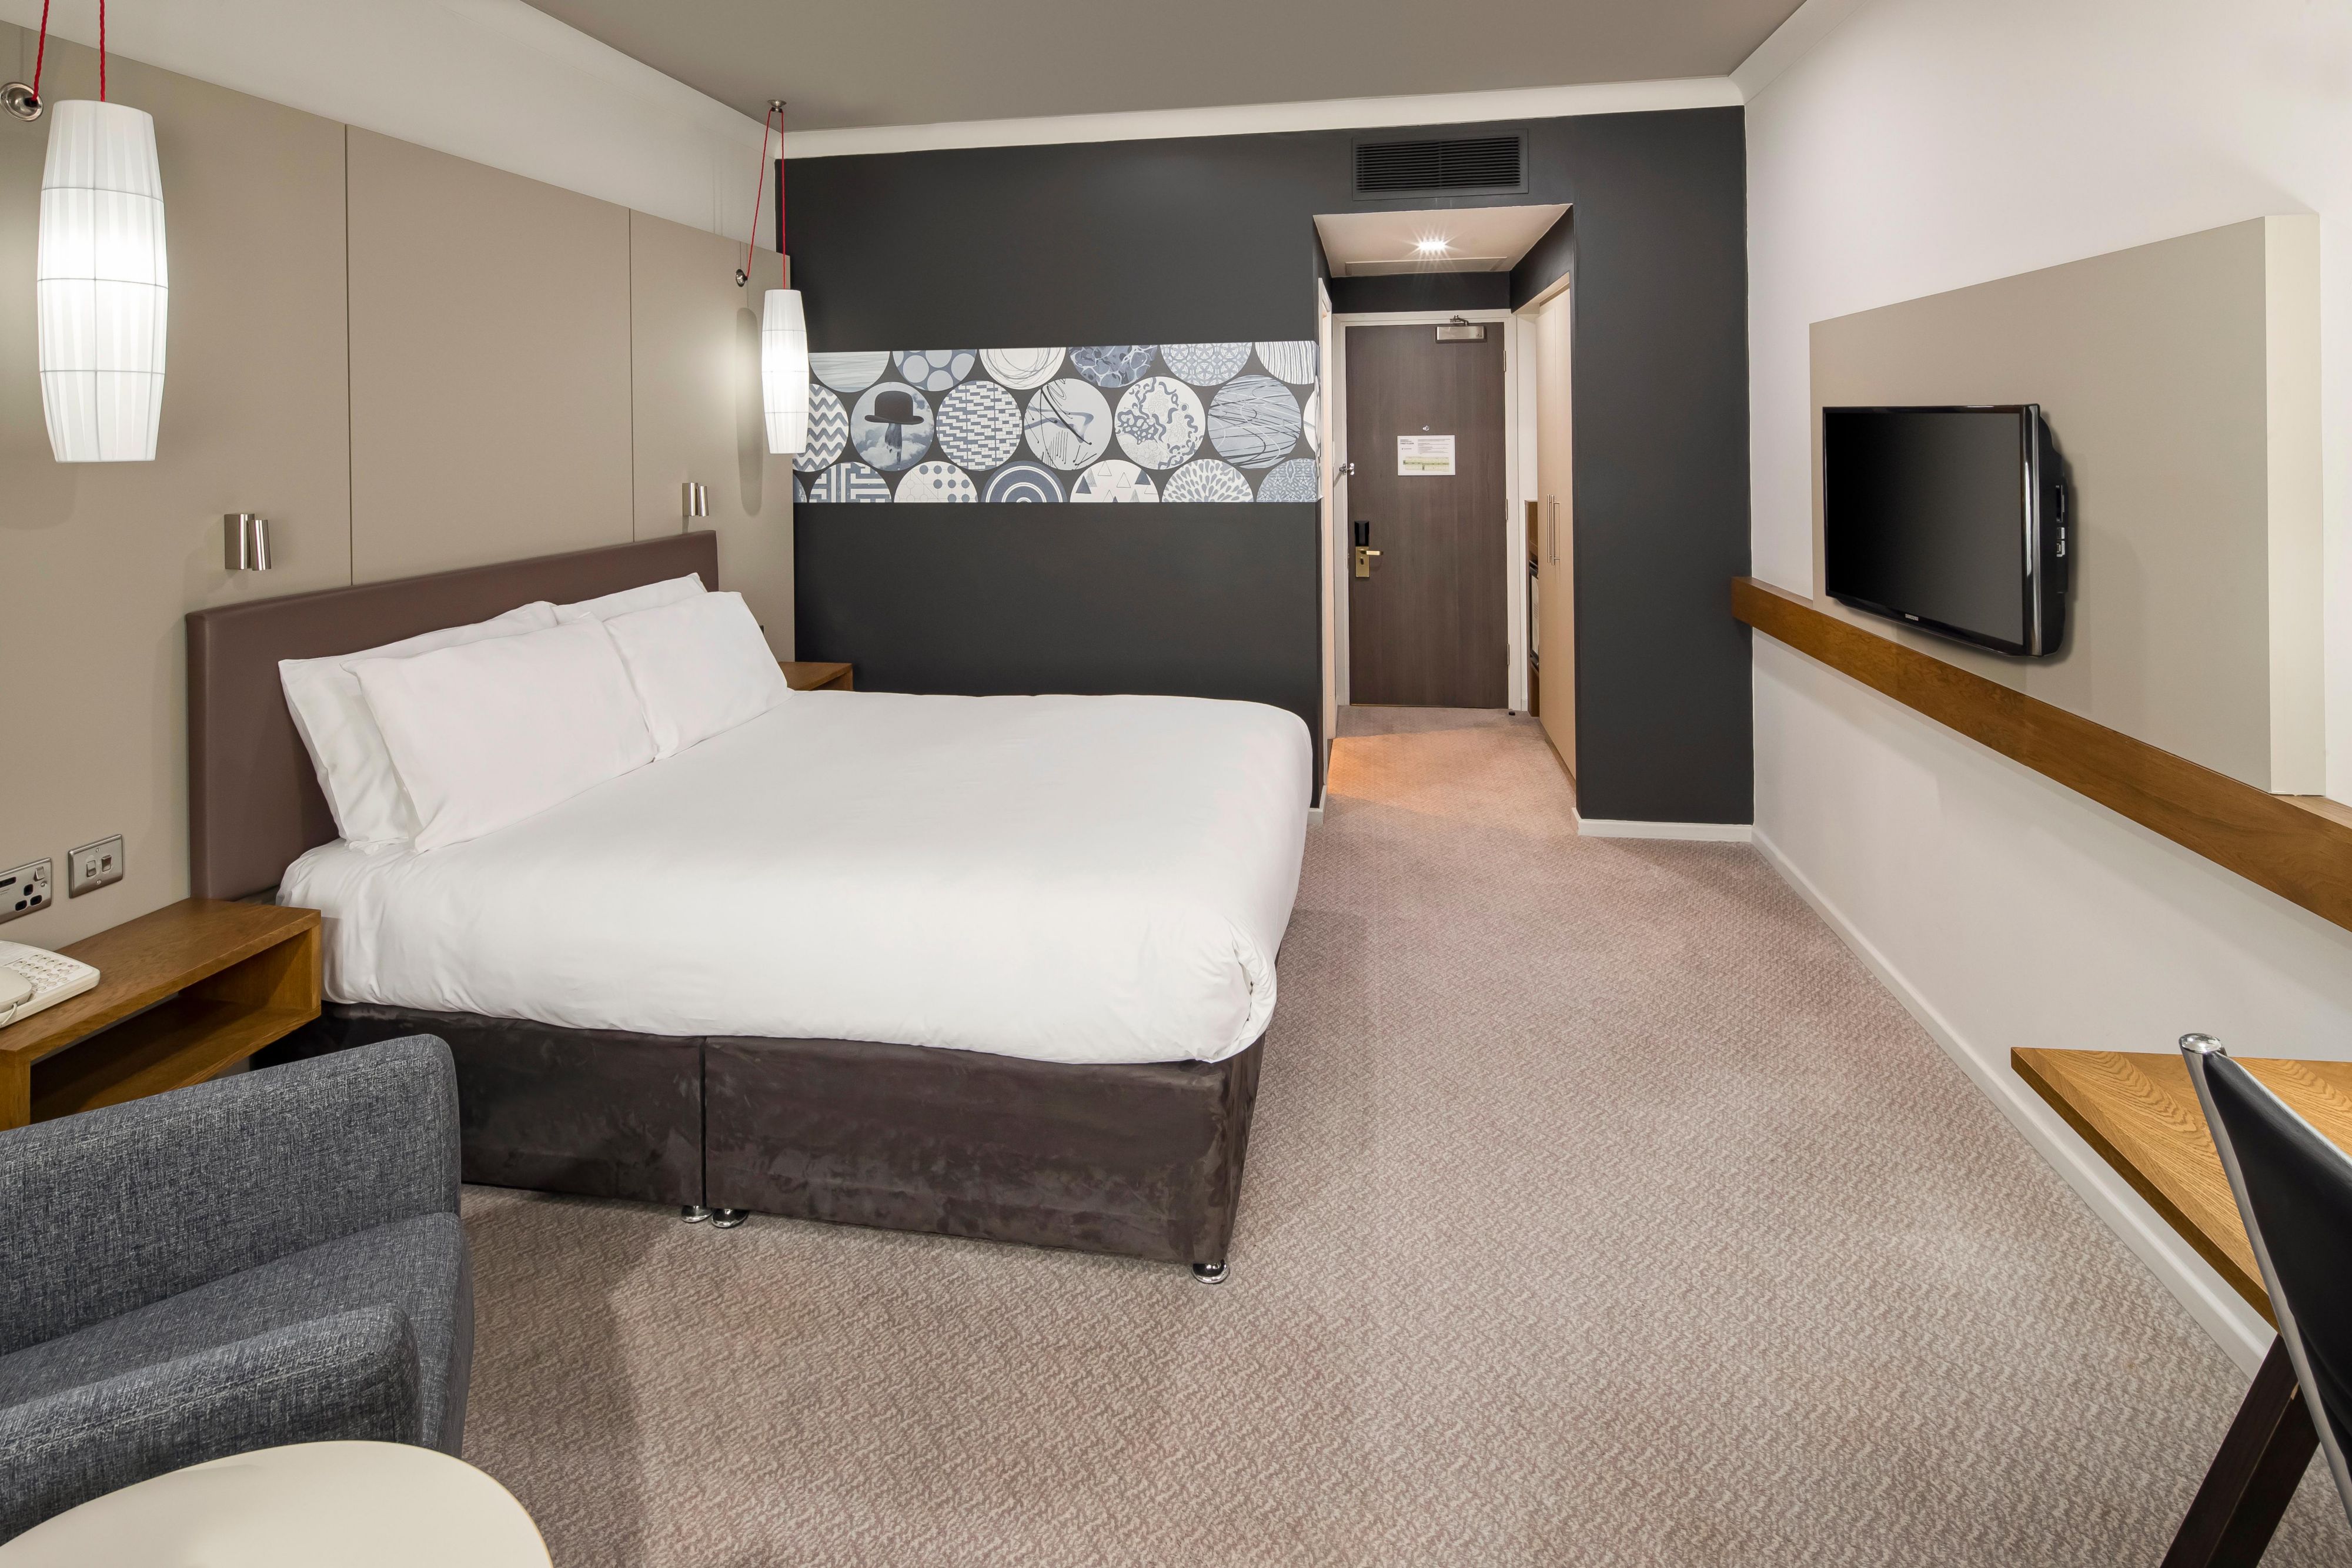 Enjoy your stay in our spacious and modern standard room.